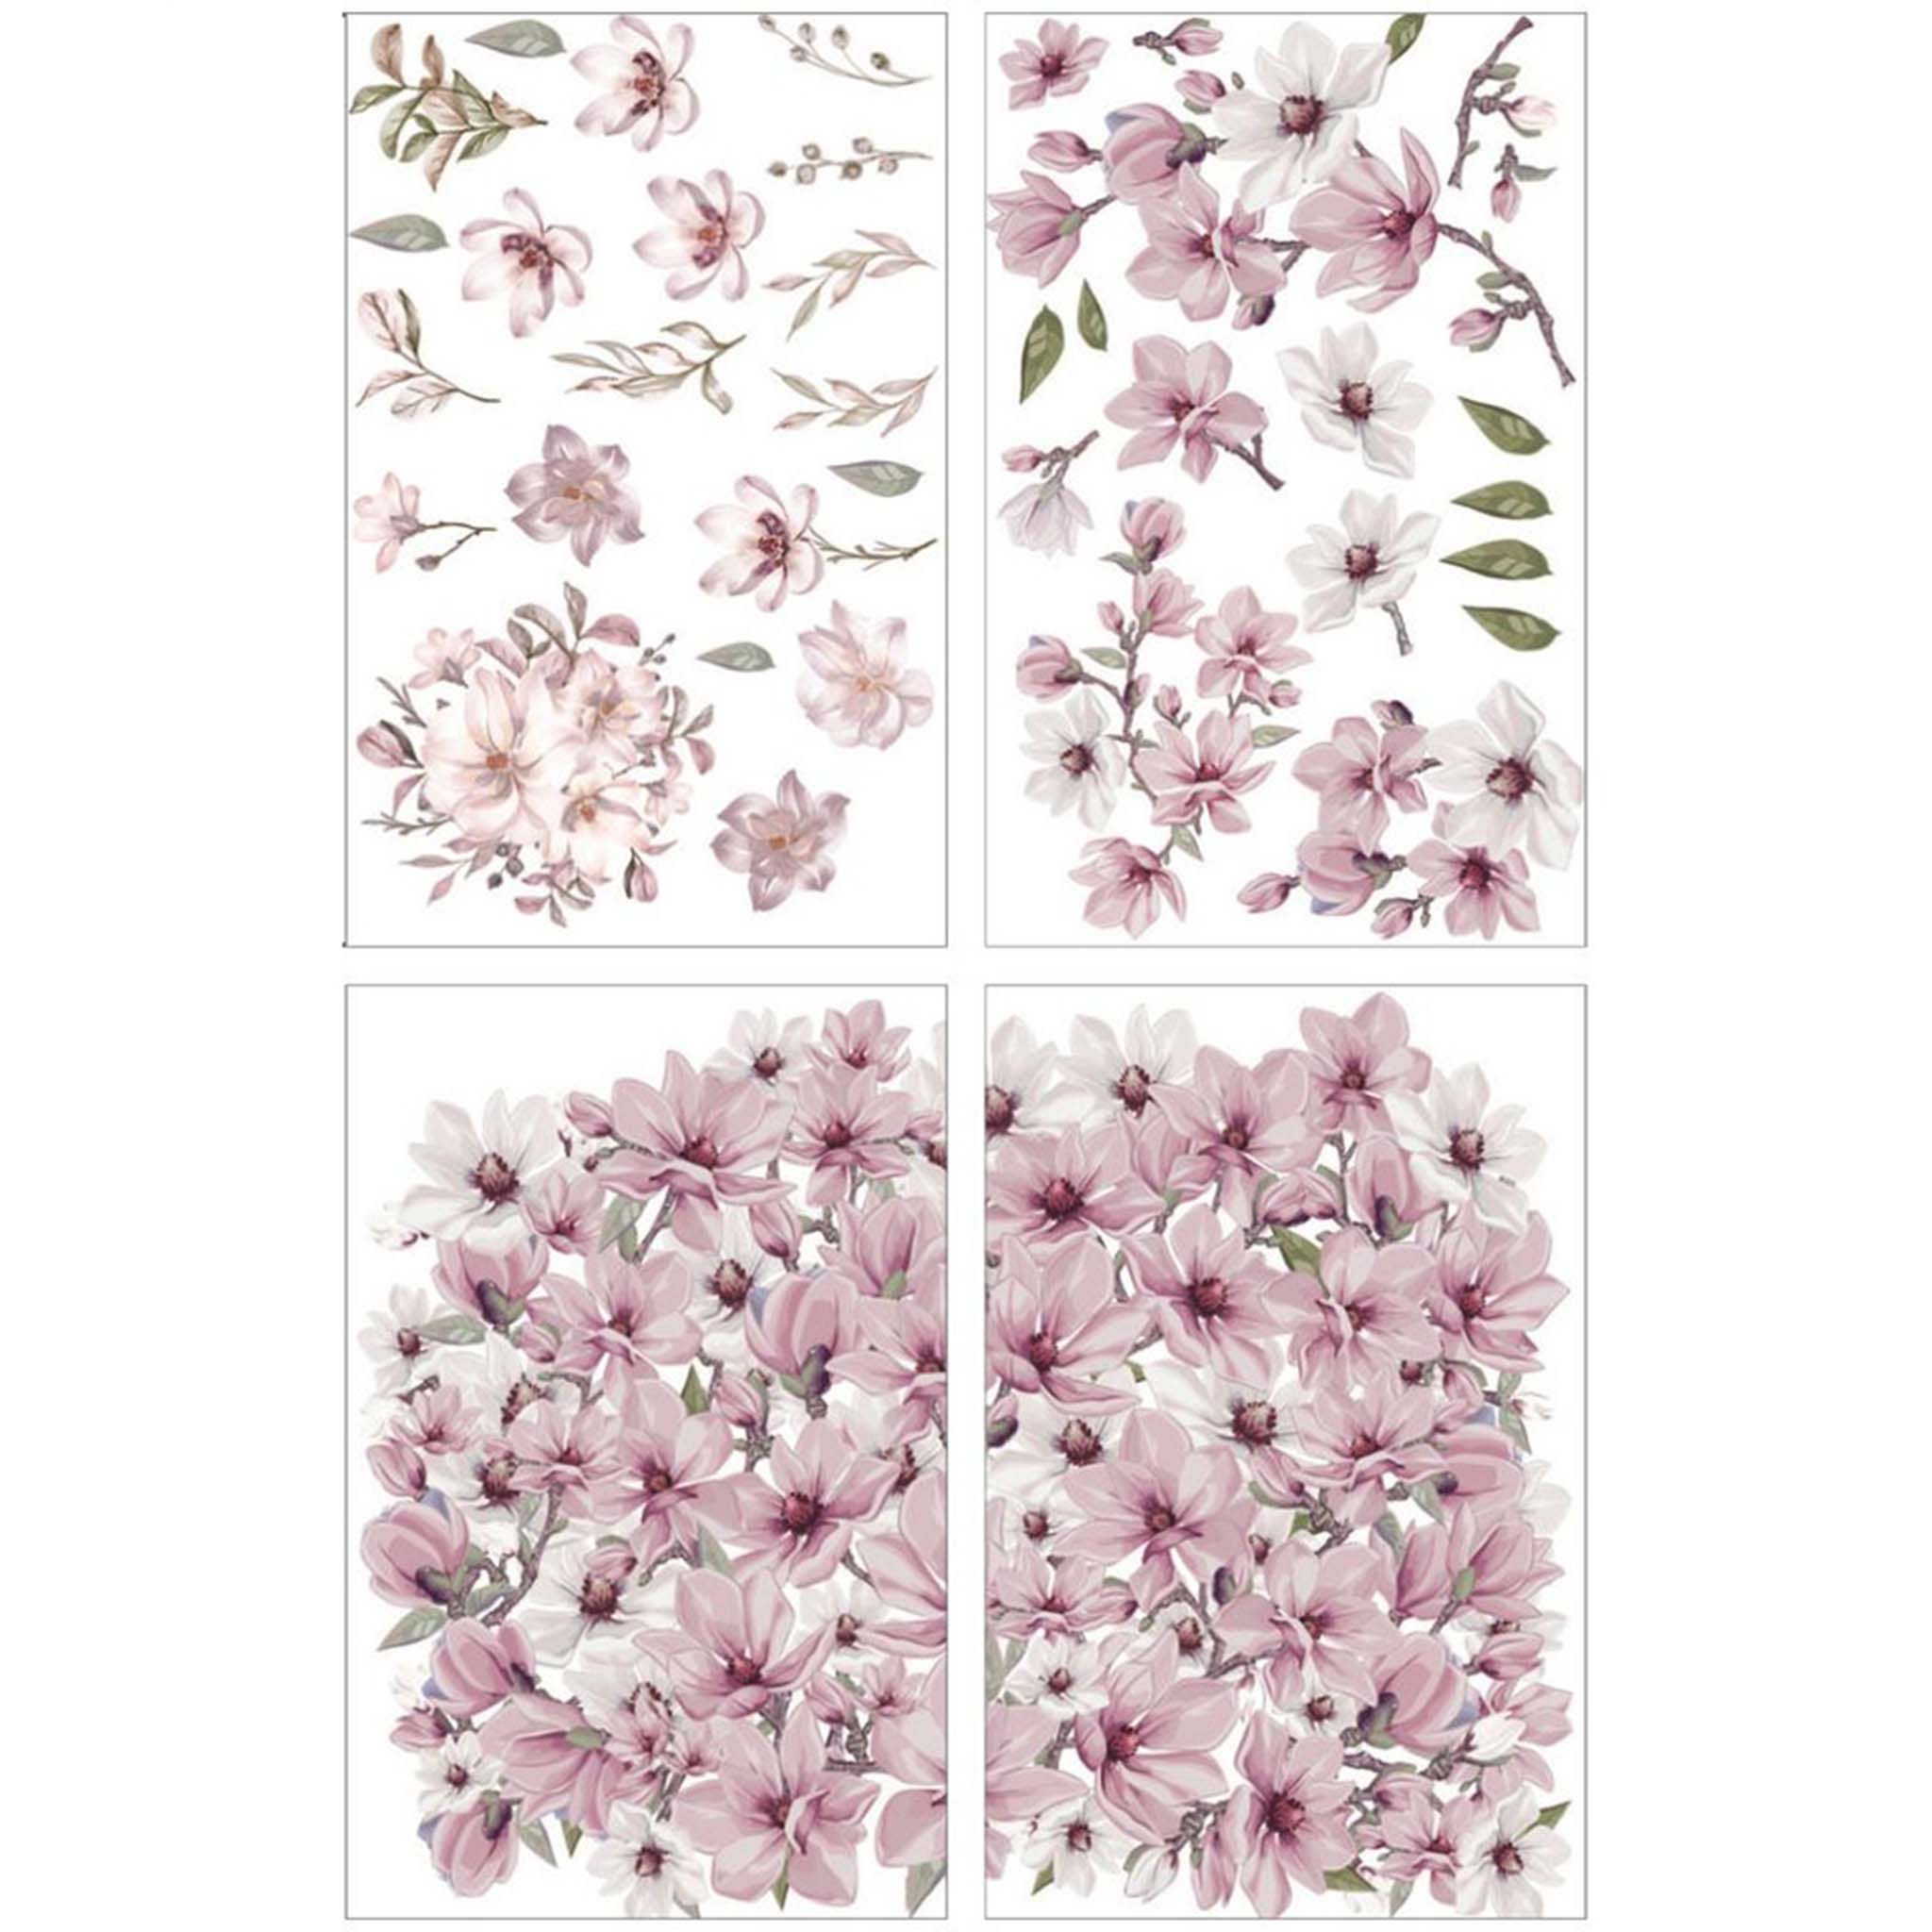 Four sheets of a rub-on transfer against a white background features delicate magnolia blooms in pale pink and creamy white.